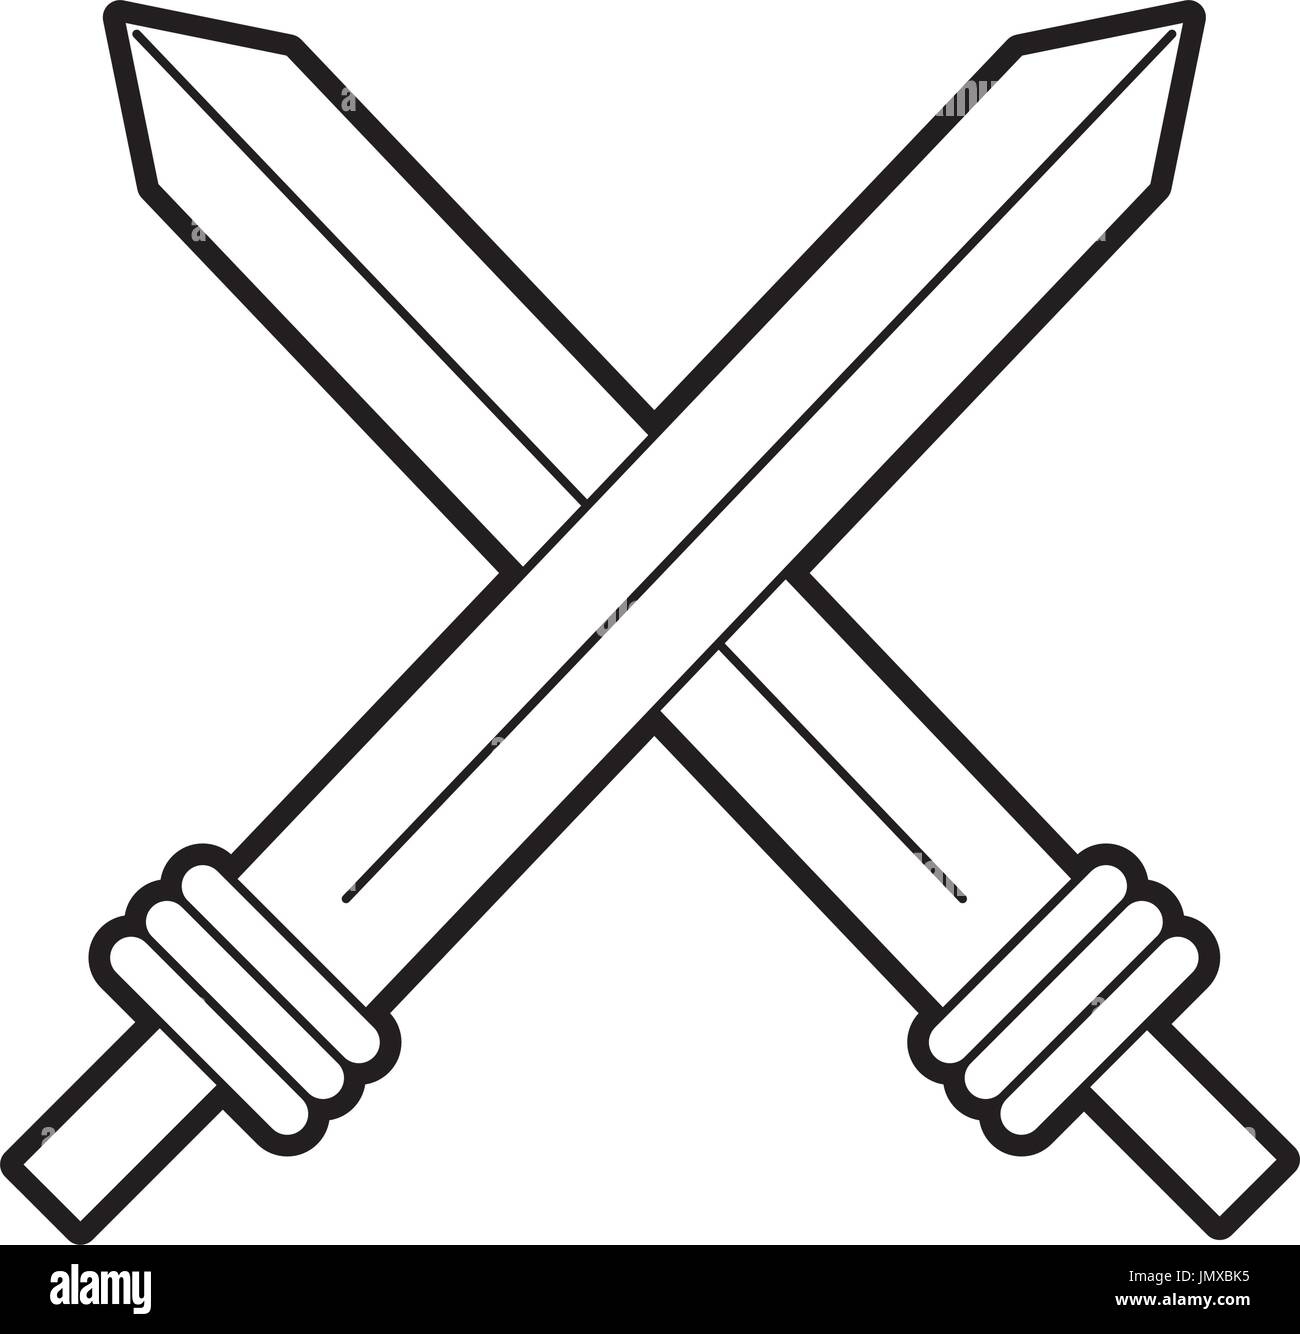 Two Crossed Sword Ornate Steel Swords Royalty Free SVG, Cliparts, Vectors,  and Stock Illustration. Image 6144776.